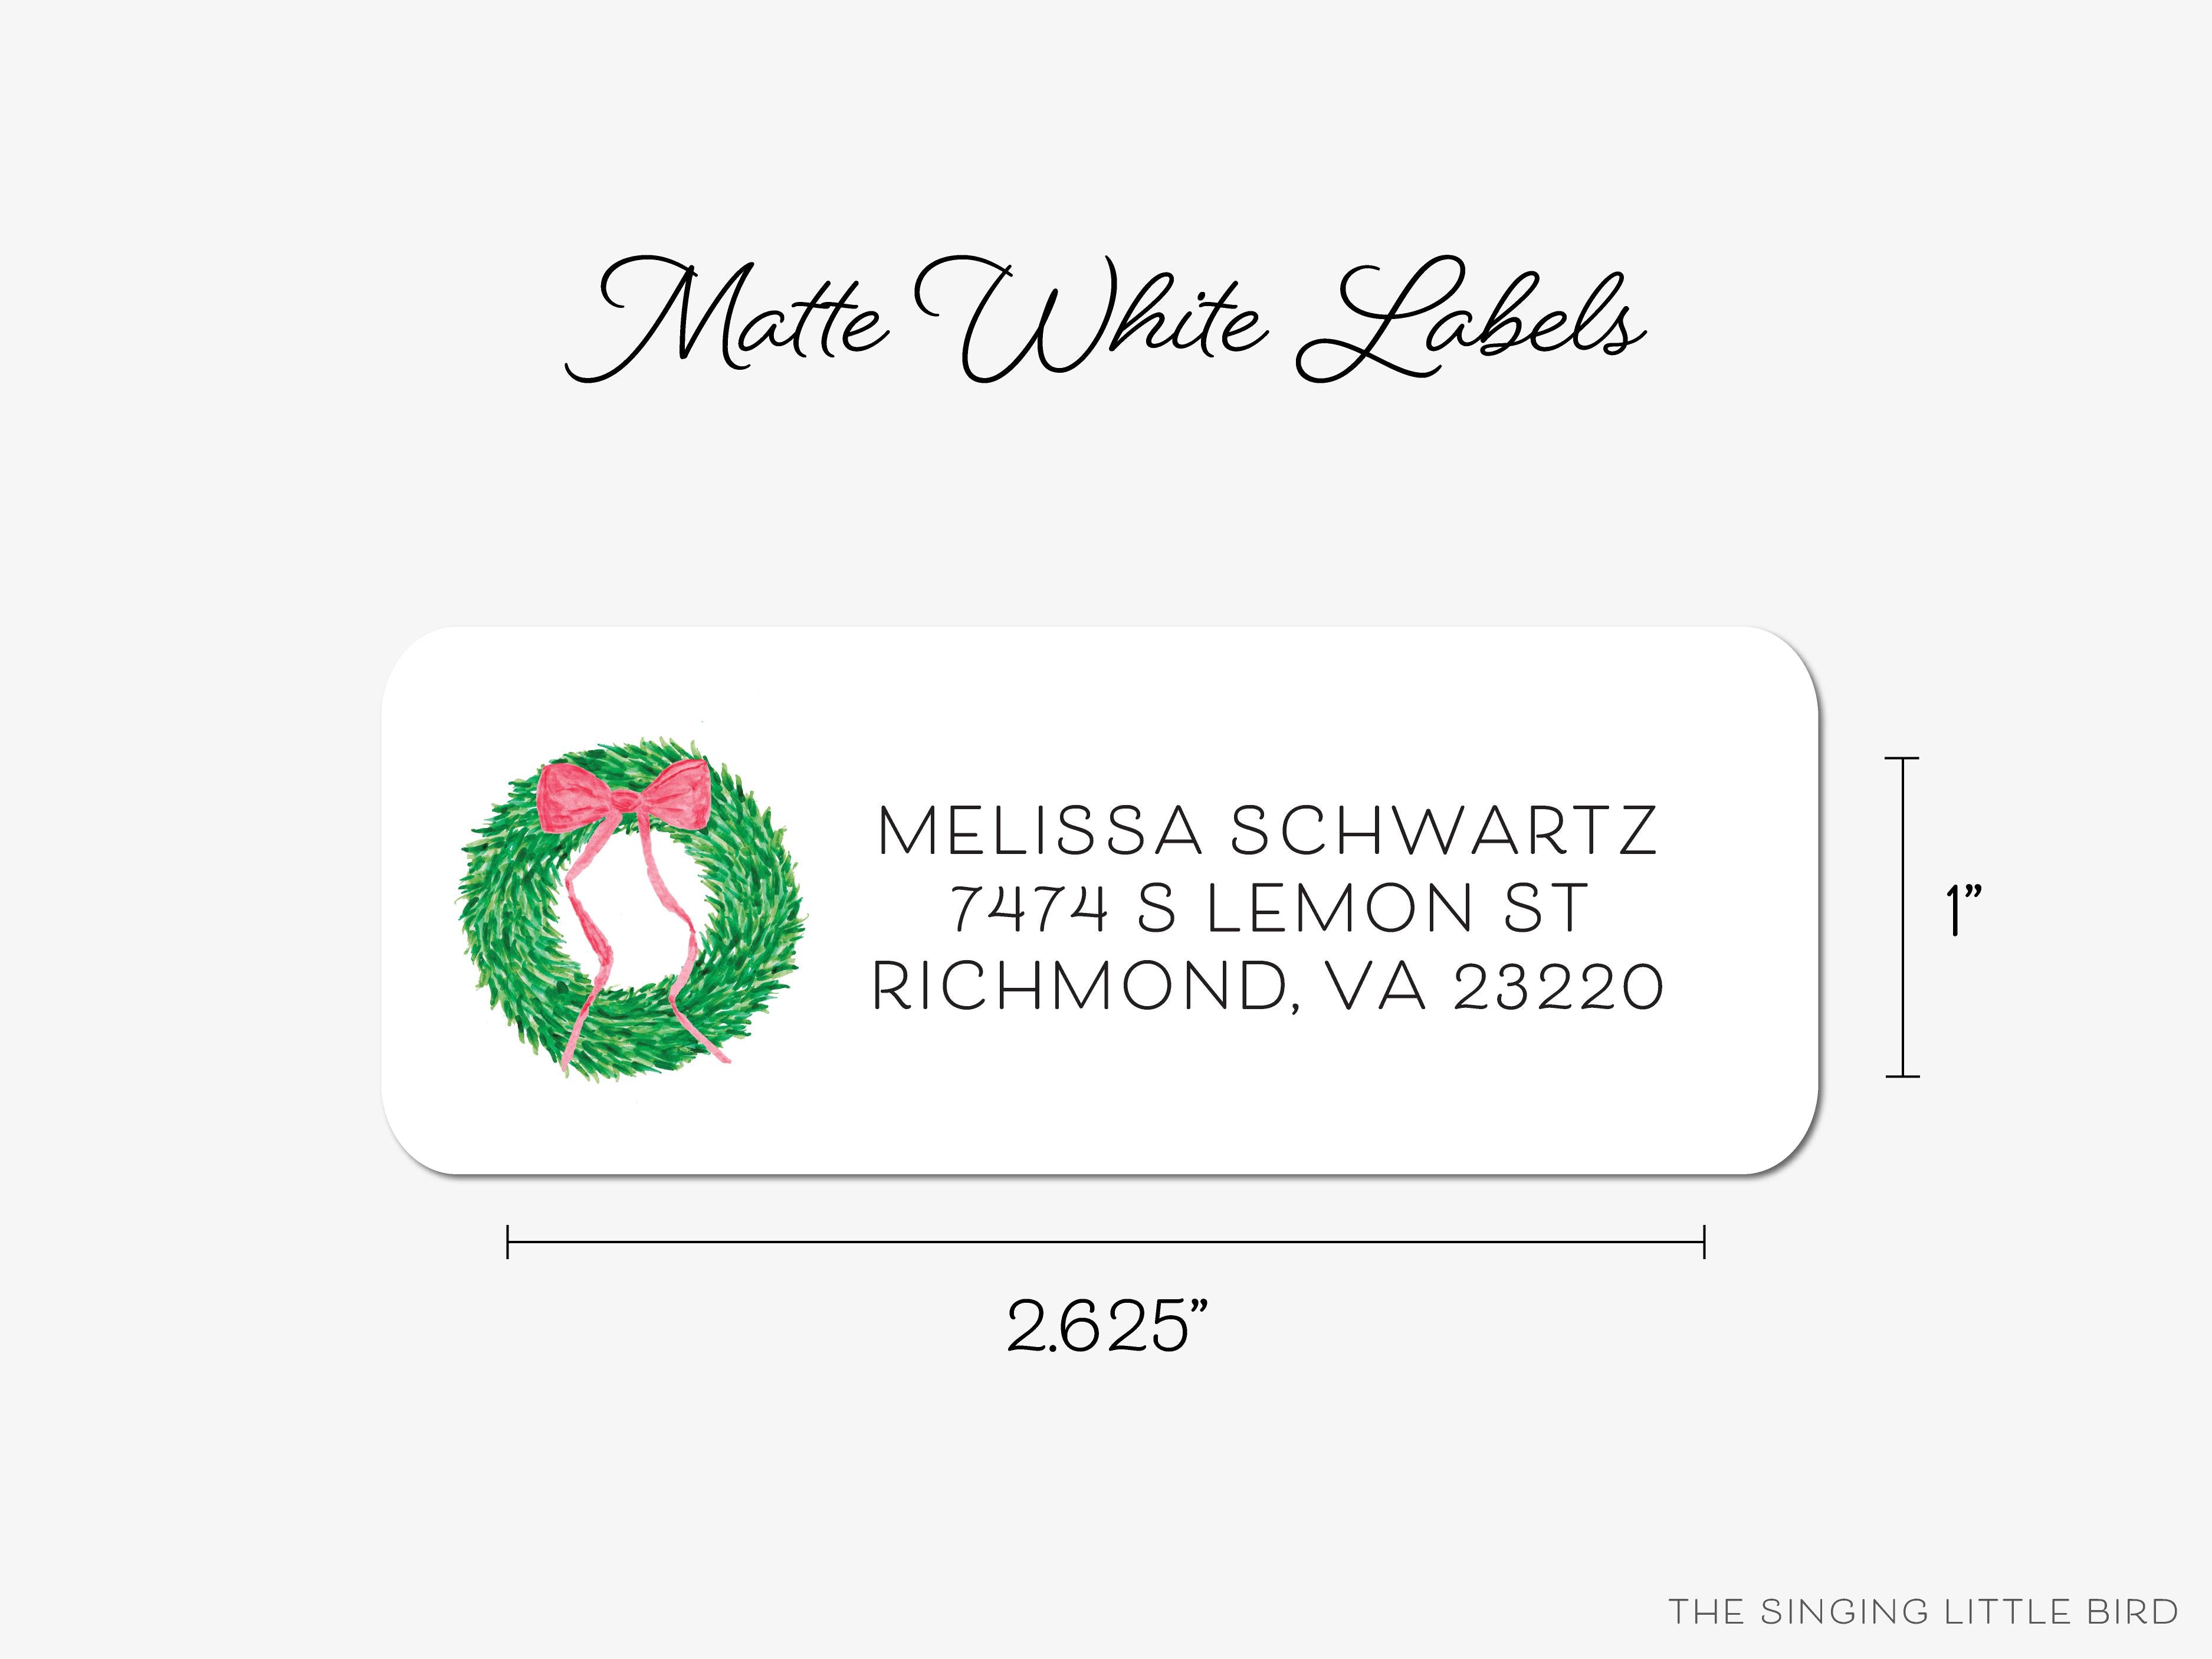 Wreath With Red Bow Return Address Labels-These personalized return address labels are 2.625" x 1" and feature our hand-painted watercolor wreath with red bow, printed in the USA on beautiful matte finish labels. These make great gifts for yourself or the Christmas wreath lover.-The Singing Little Bird